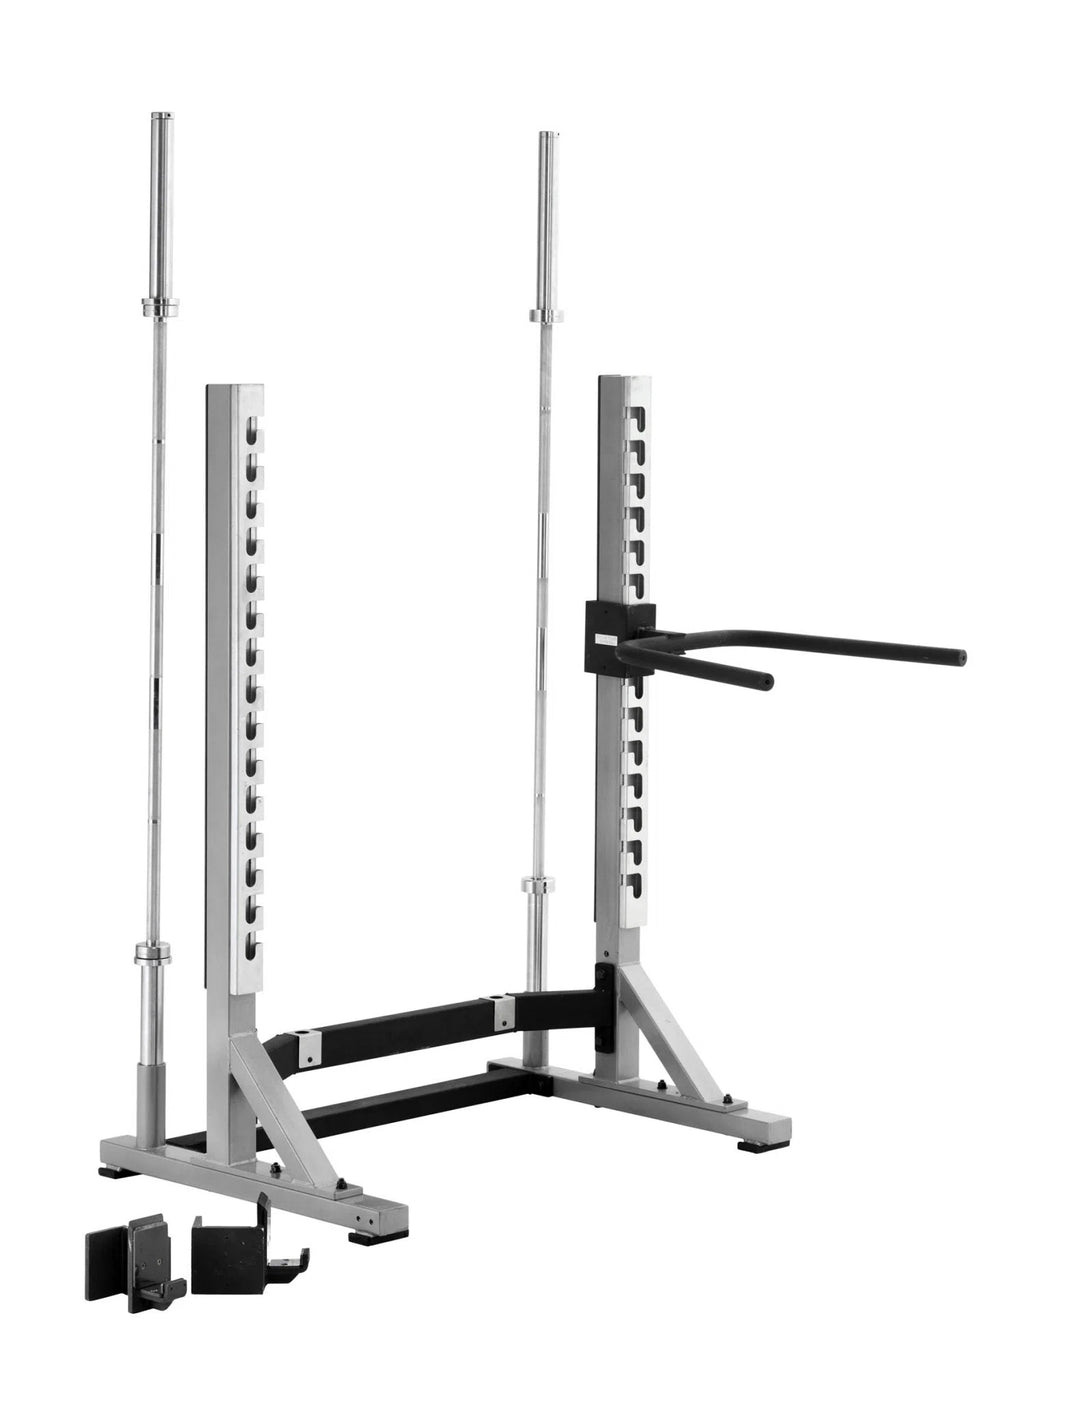 York Barbell STS Collegiate Squat Rack 55054 with attachment